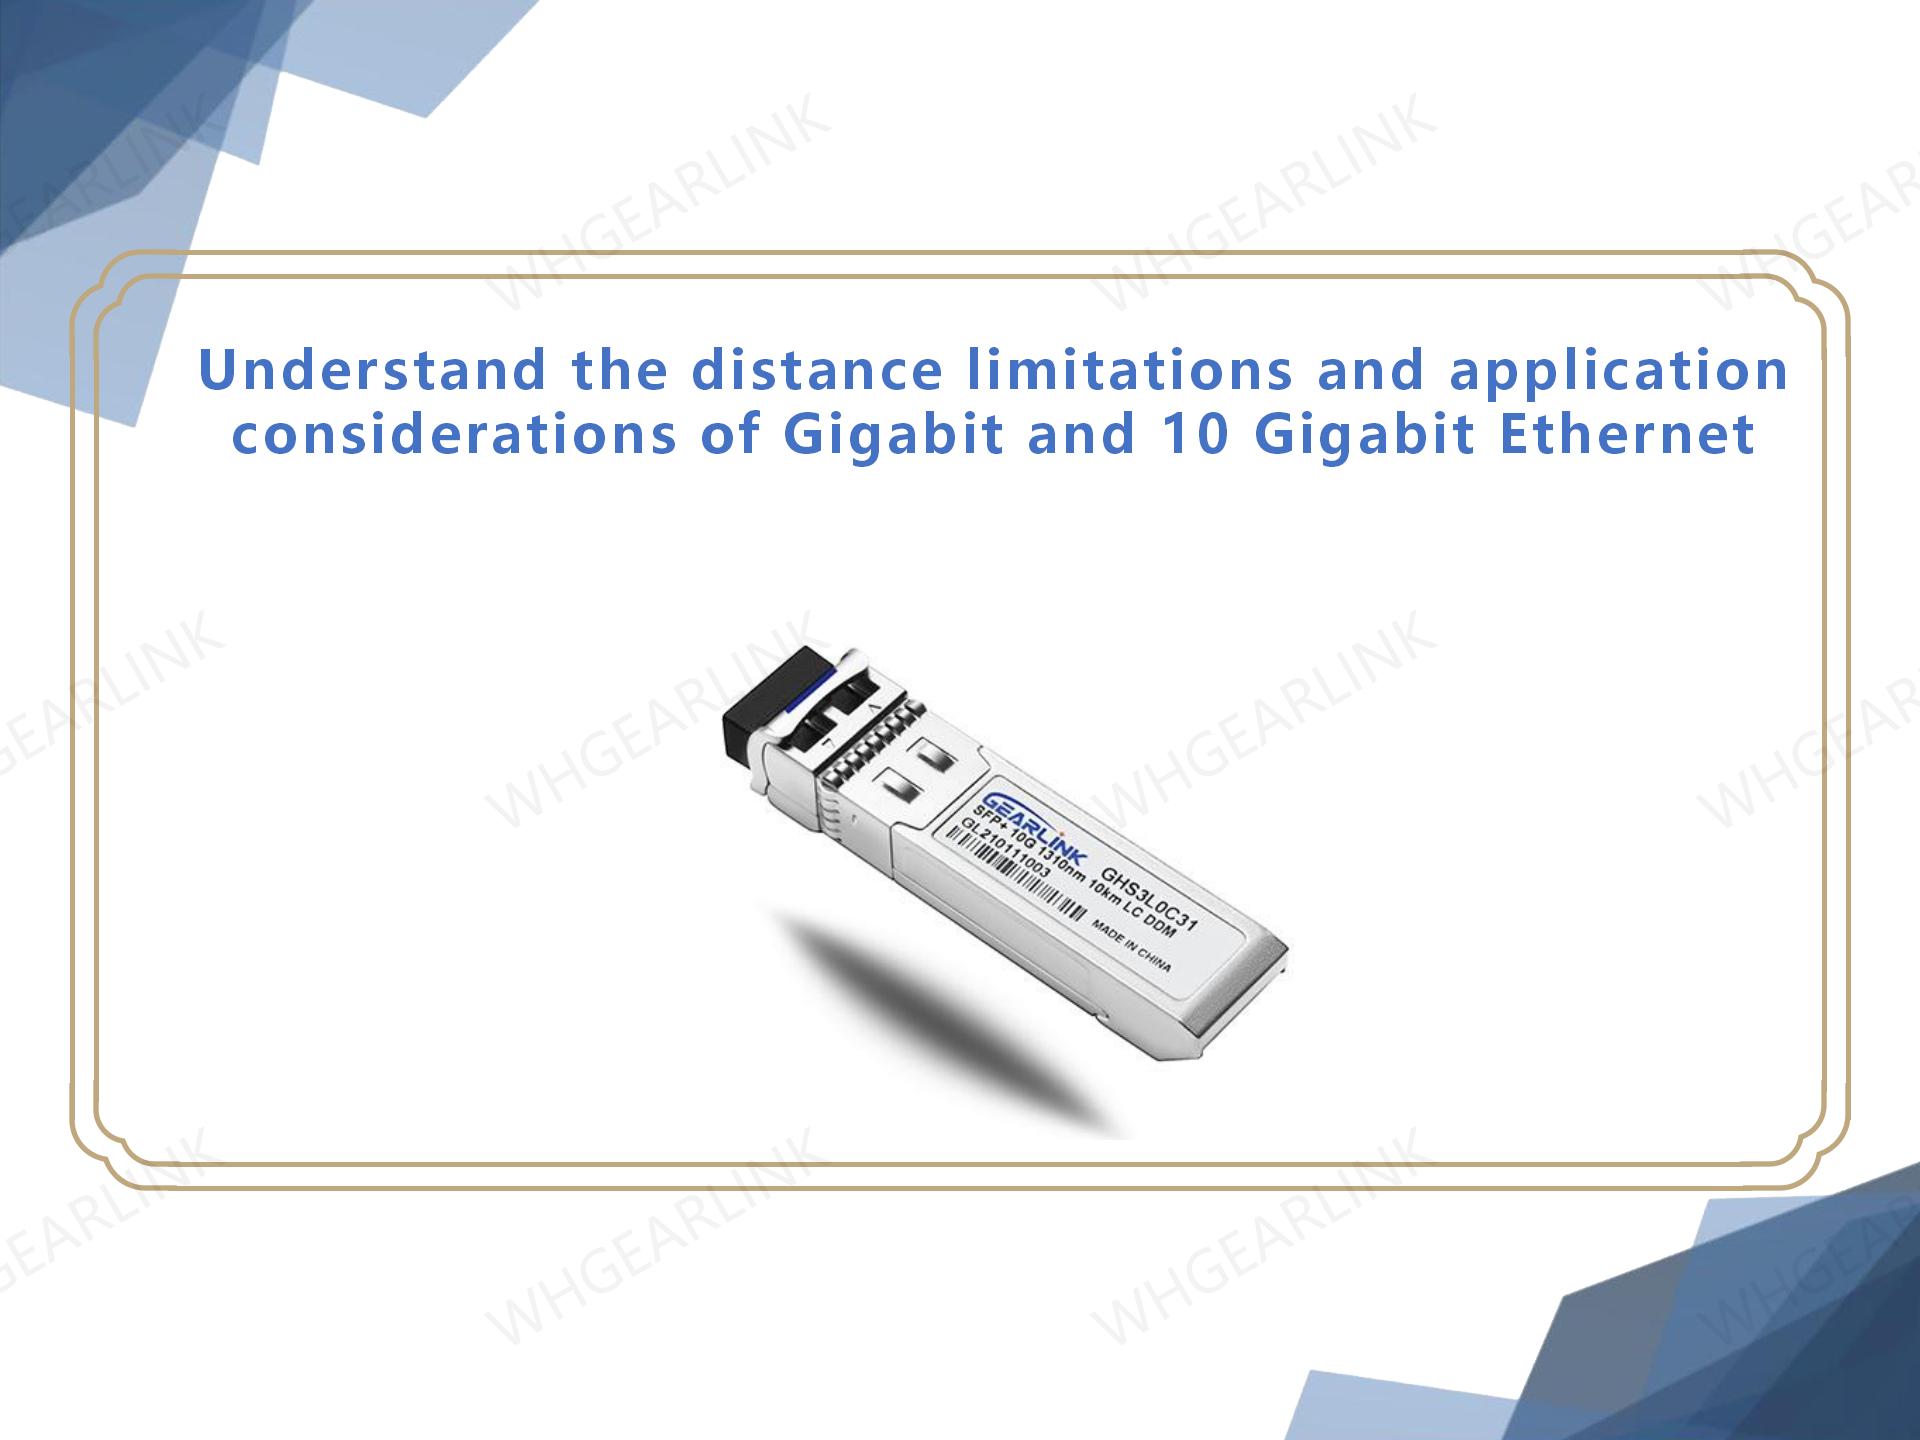 Understand the distance limitations and application considerations of Gigabit and 10 Gigabit Ethernet